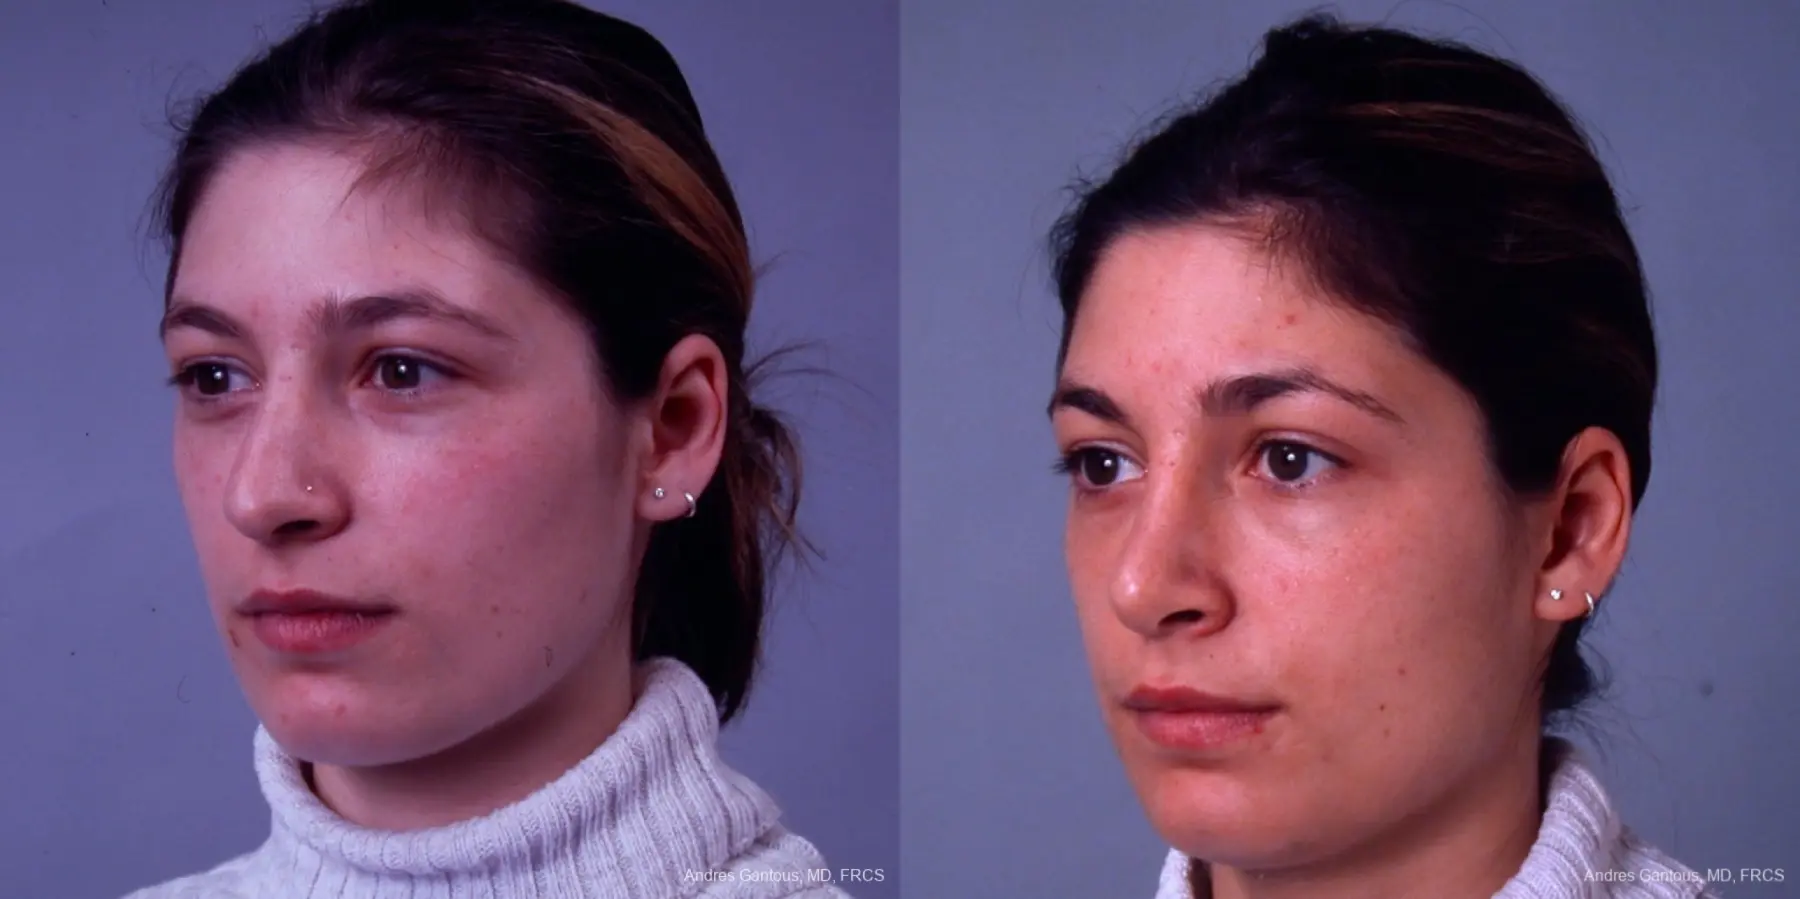 Rhinoplasty: Patient 32 - Before and After 2